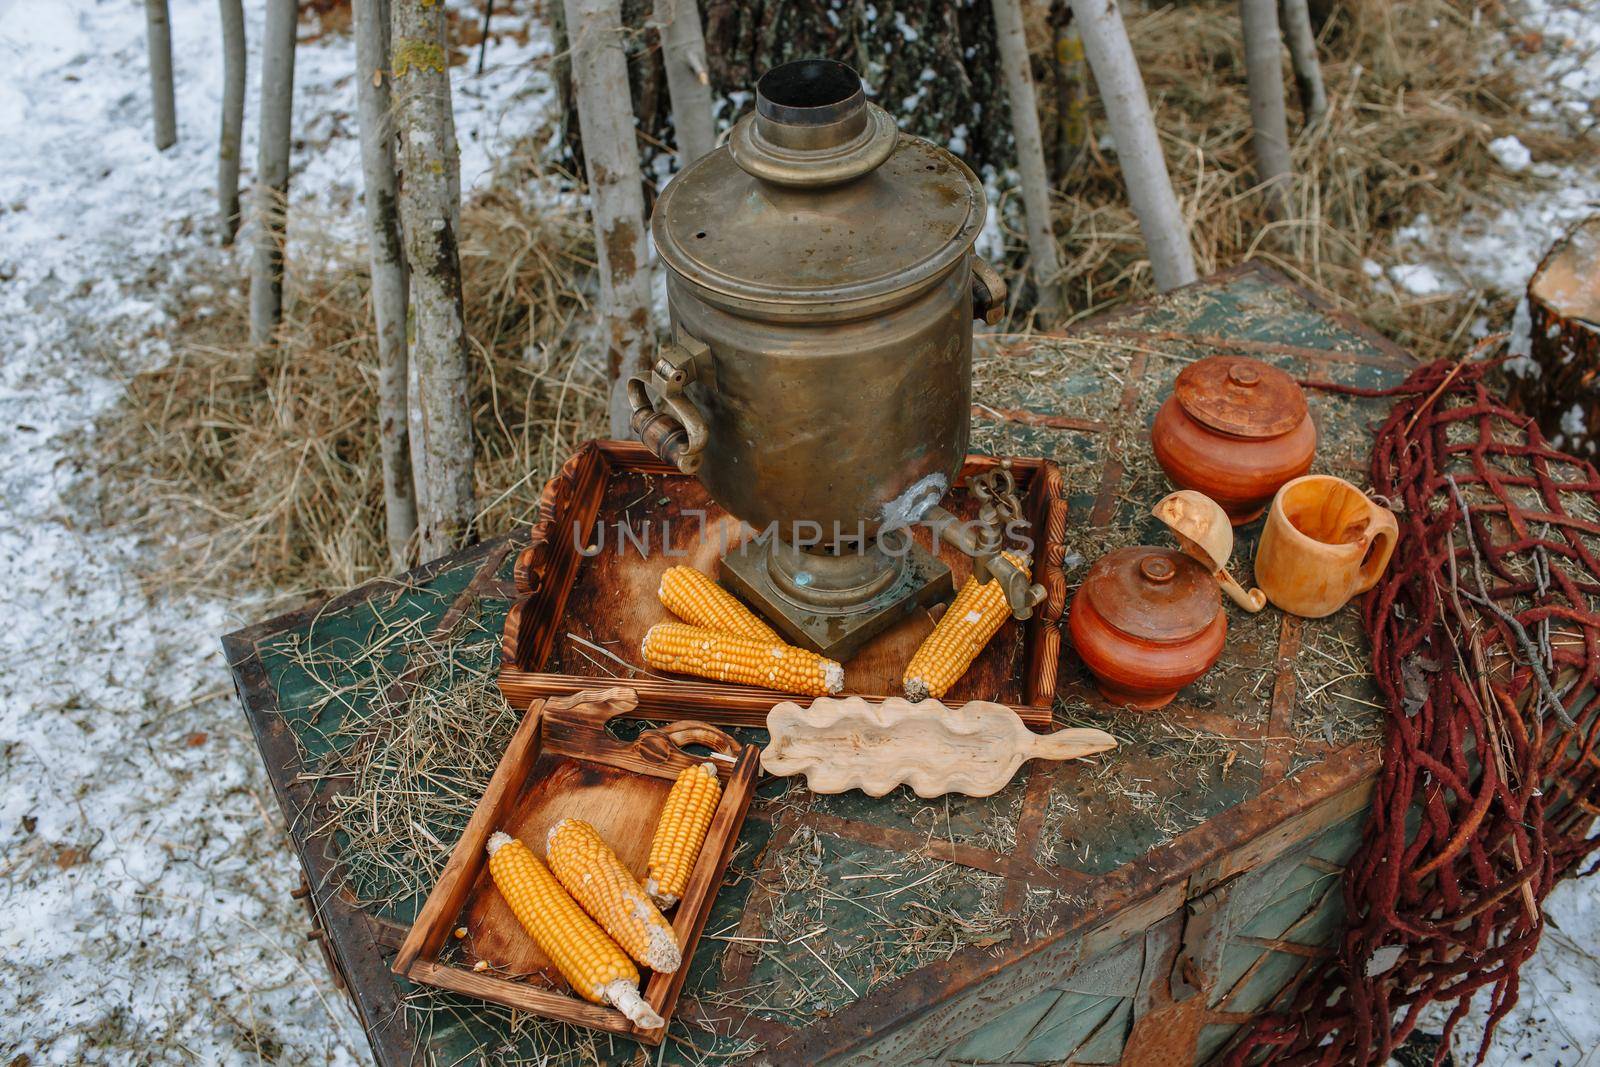 An old samovar standing on a chest in the winter forest.